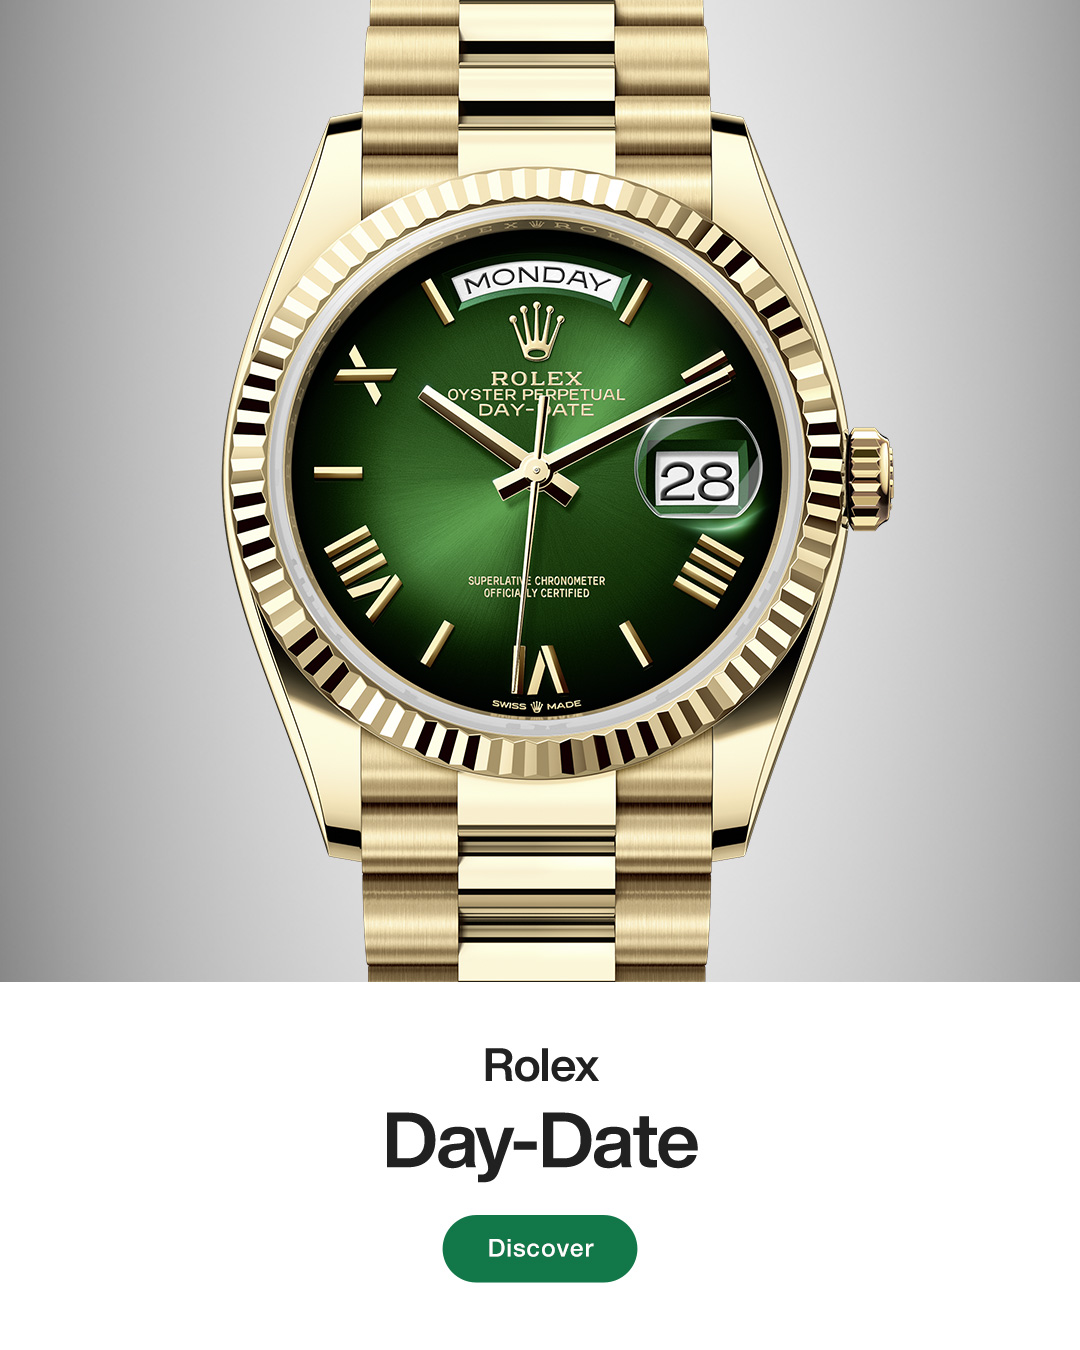 Rolex Day-Date Watches | Emperor Watch & Jewellery Singapore